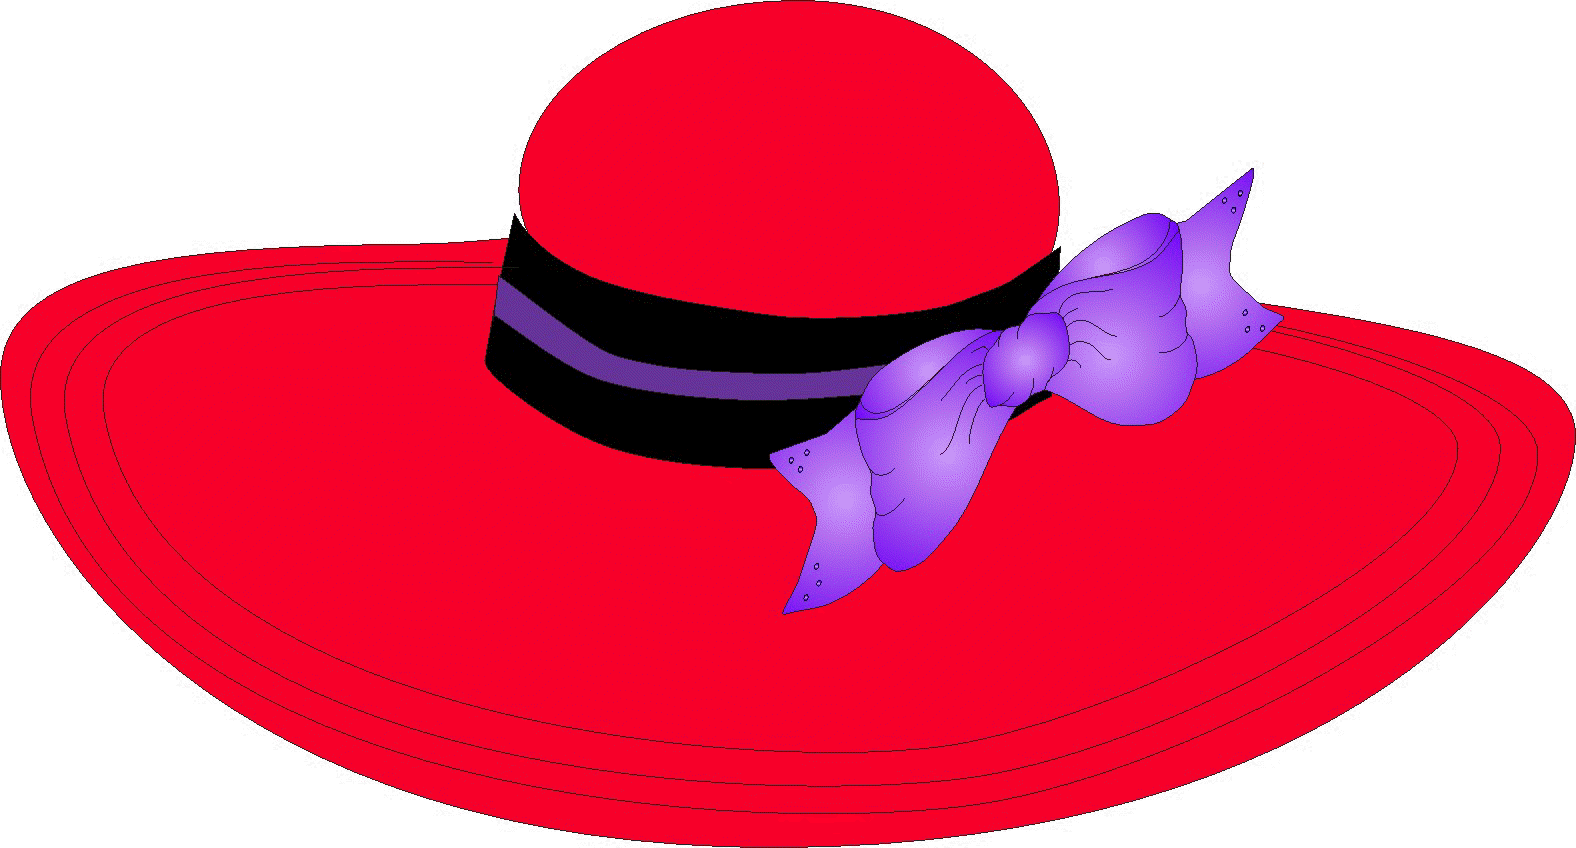 Red Hat Society Logo - Free Red Hat Picture, Download Free Clip Art, Free Clip Art